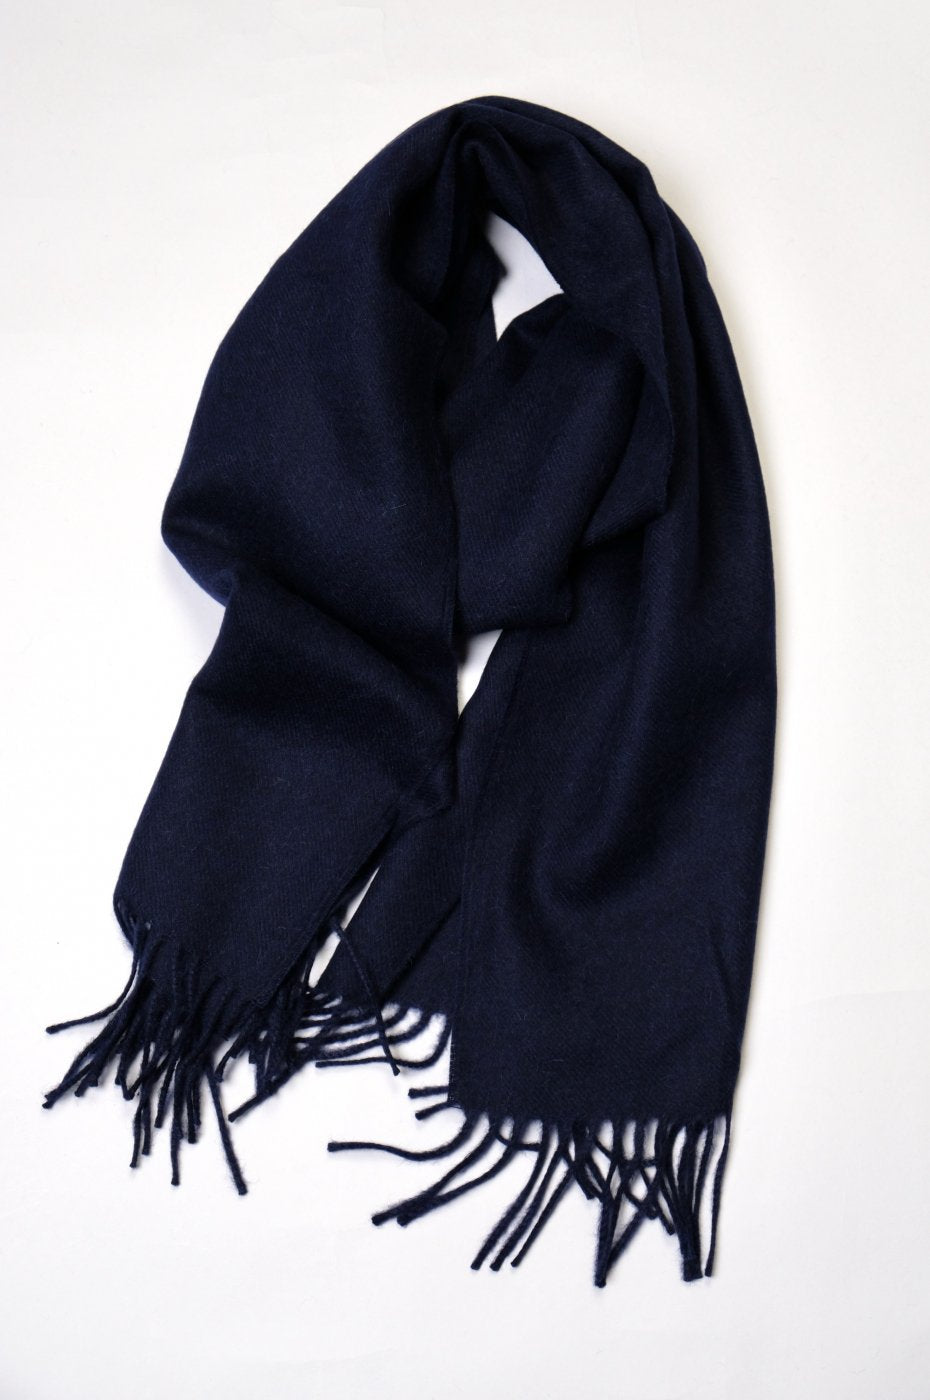 THE INOUE BROTHERS... "BRUSHED SCARF / NAVY"